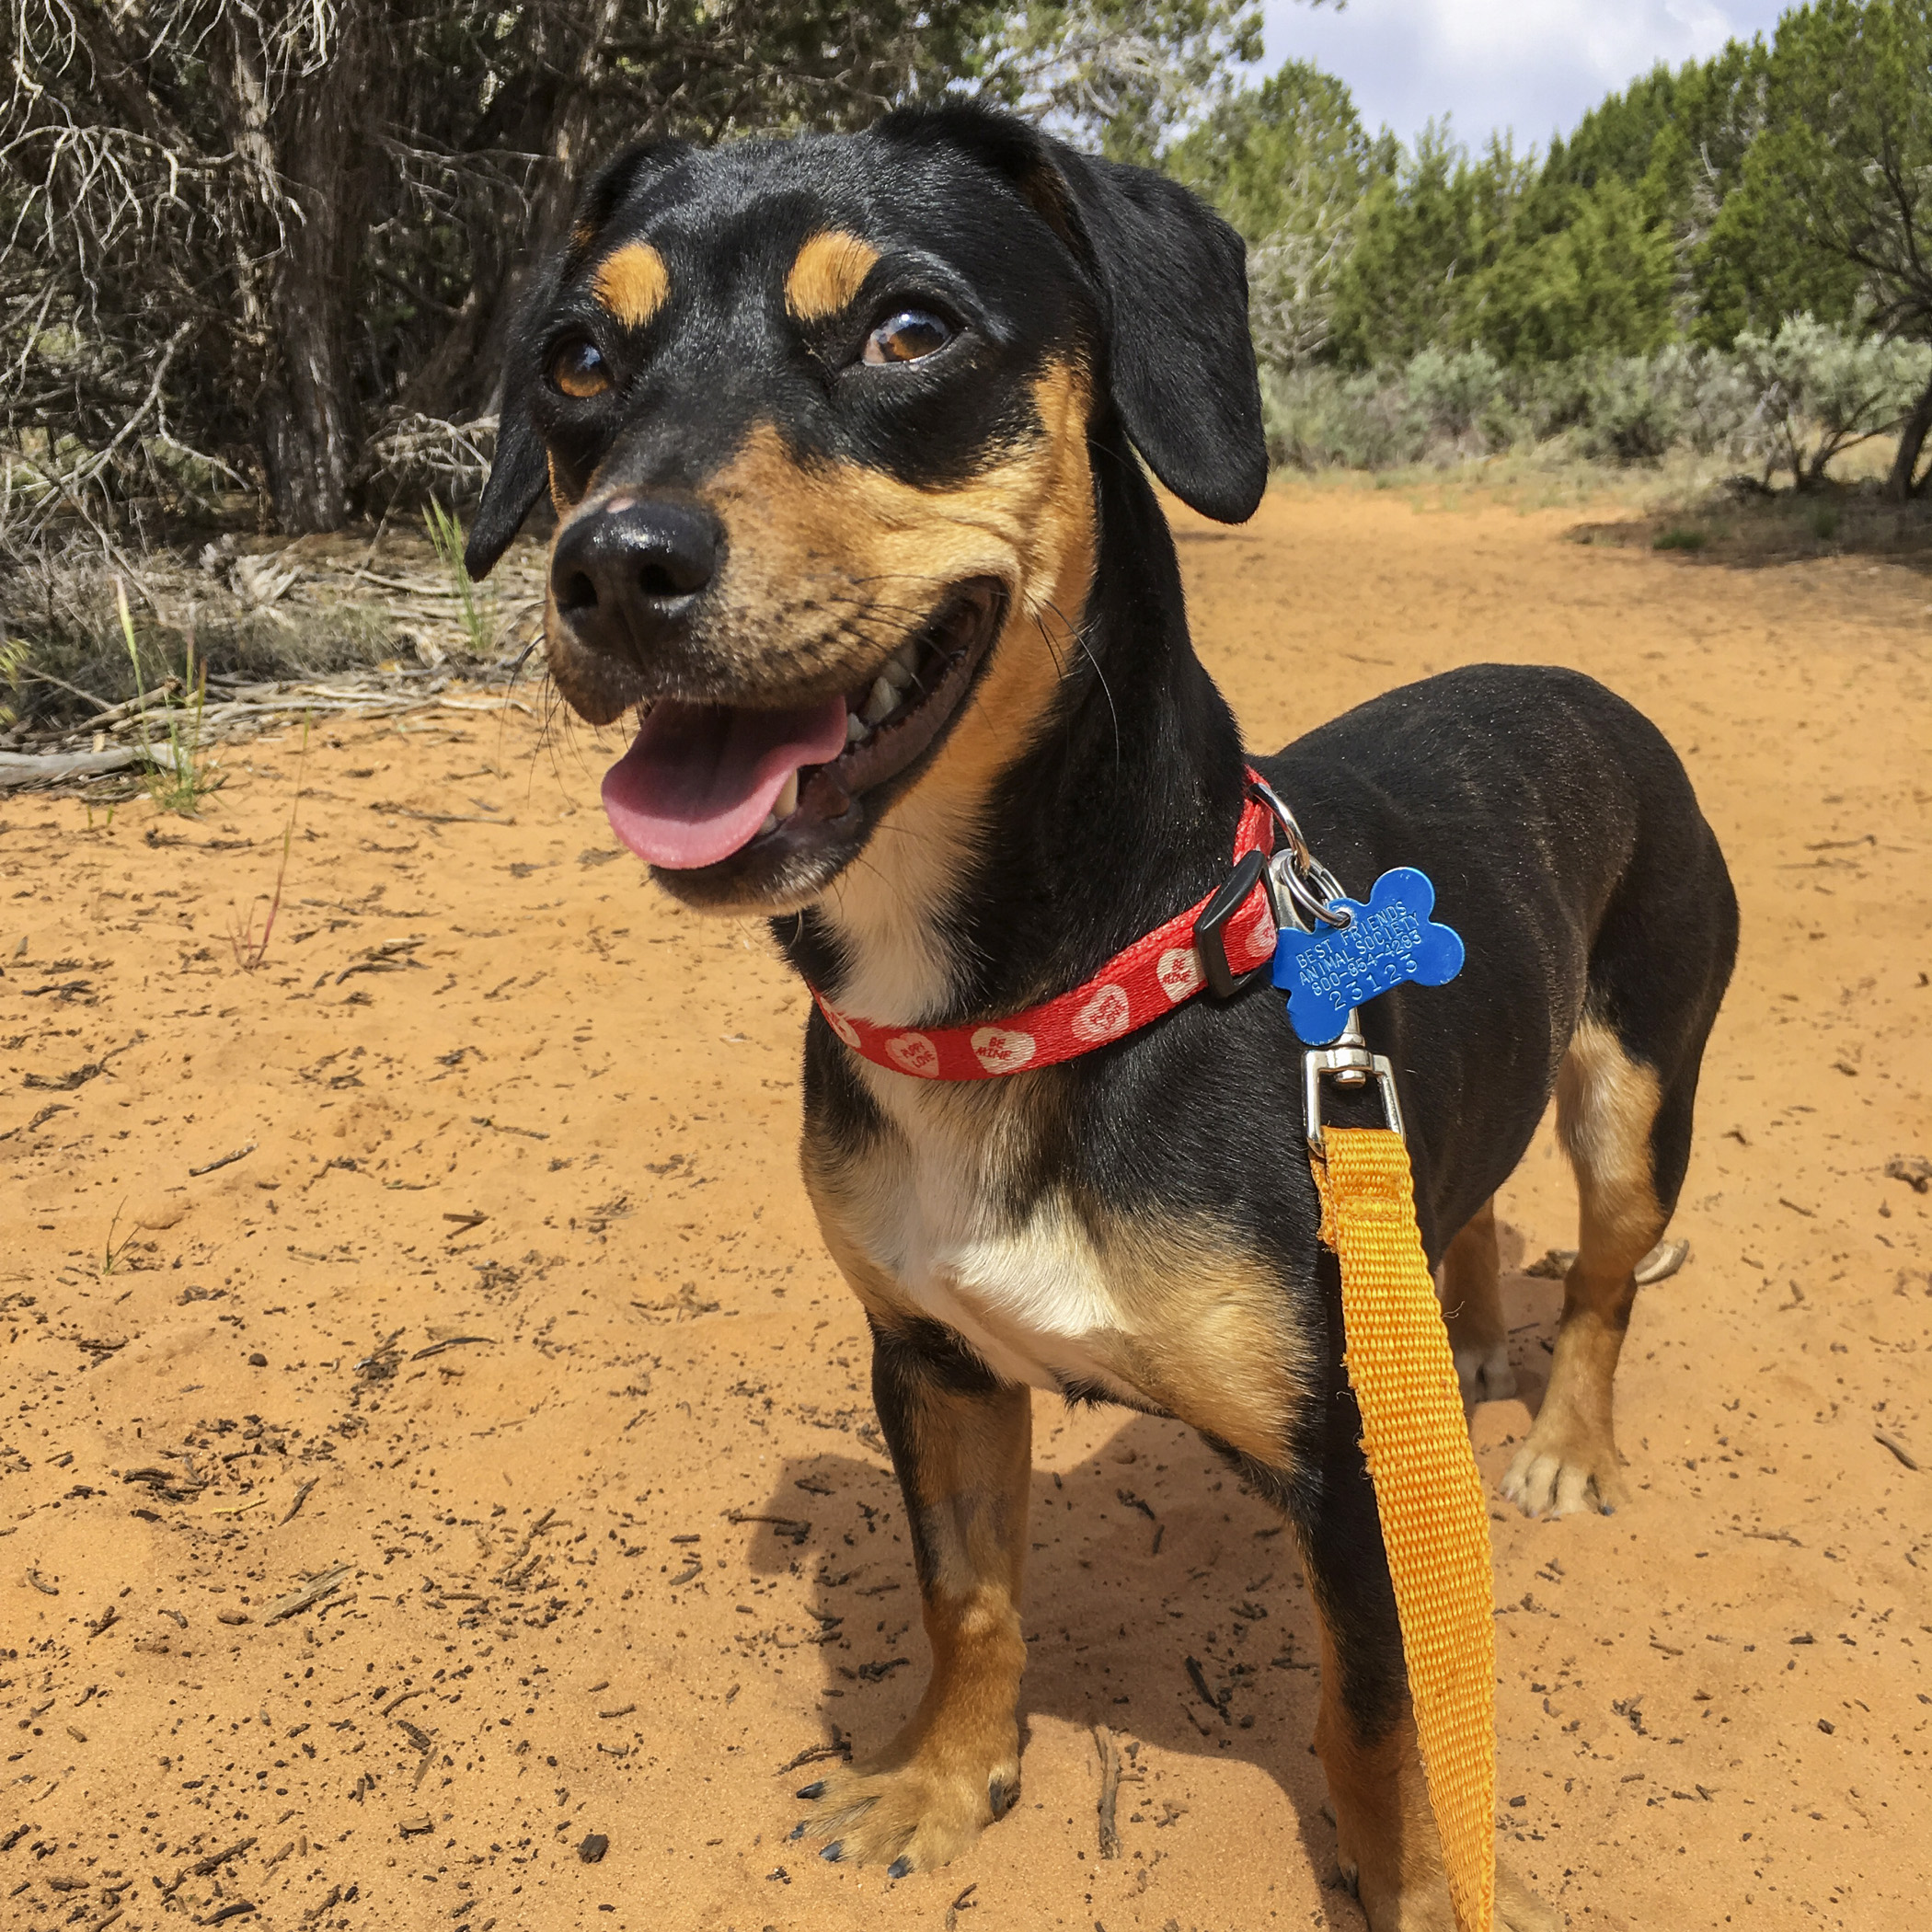  This cute little lady, Shire, is older than most puppies in the puppy section, but since she’s a smaller breed and not 100% comfortable with human handling, it is the perfect place for her to start out her journey. The expression says it all…why are